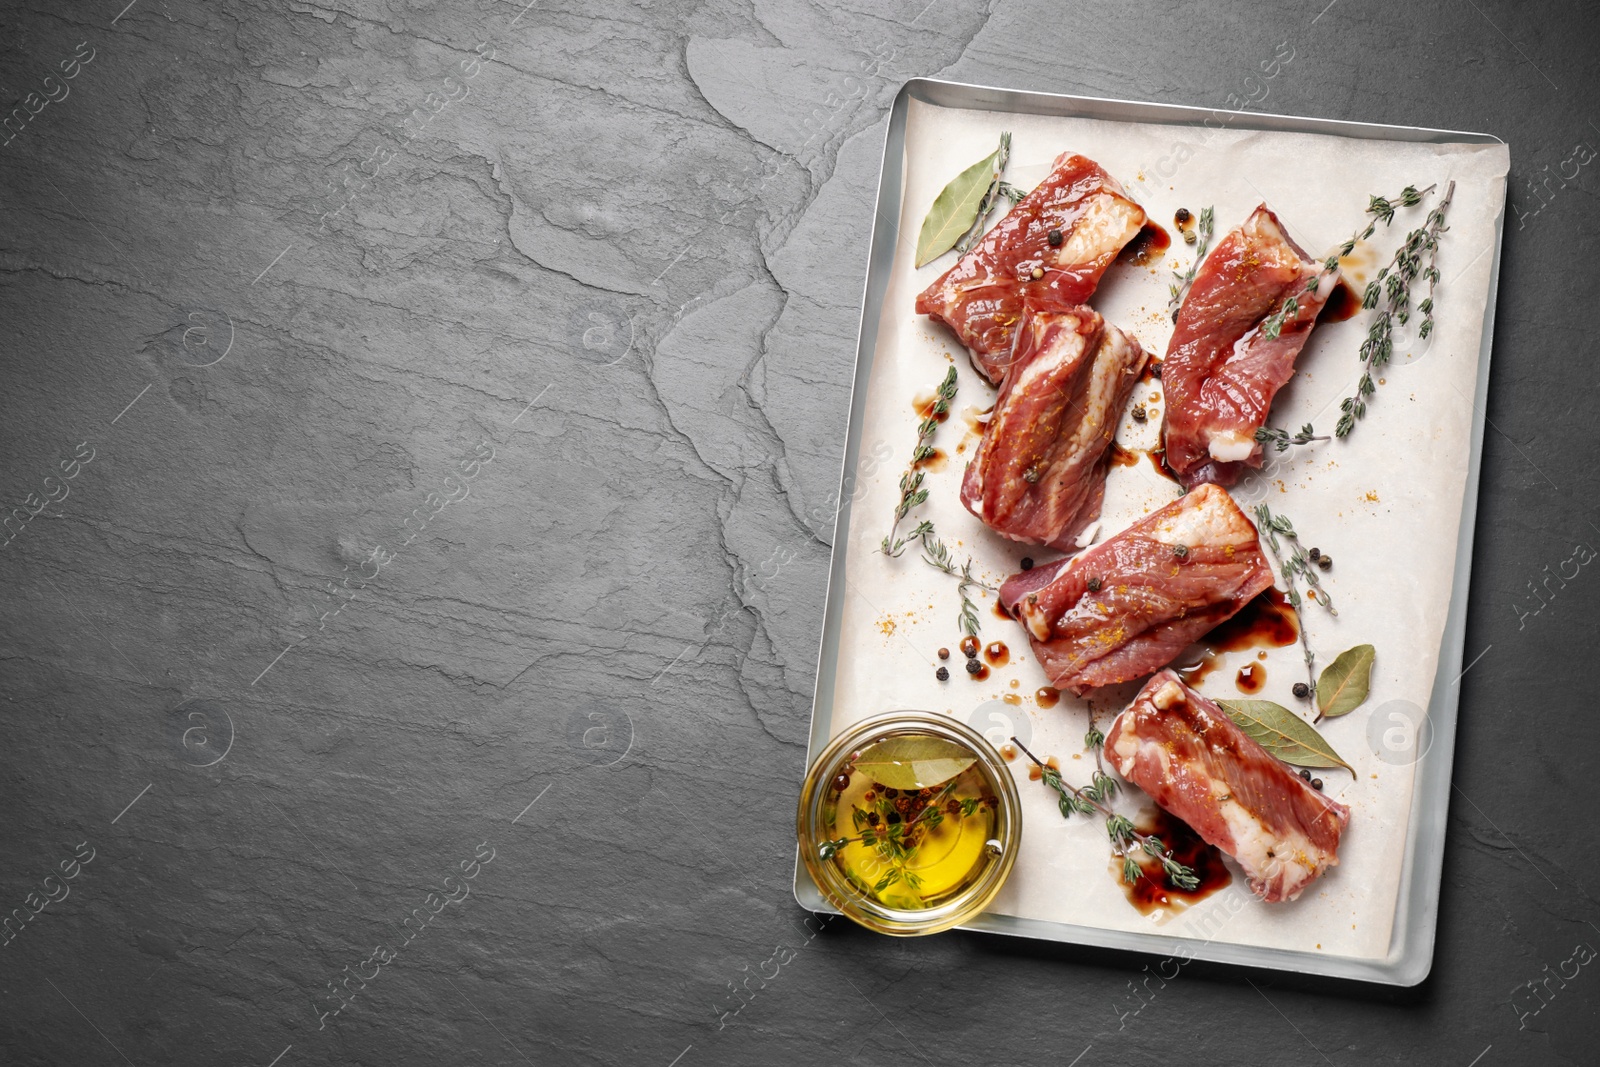 Photo of Raw marinated ribs on black table, top view. Space for text